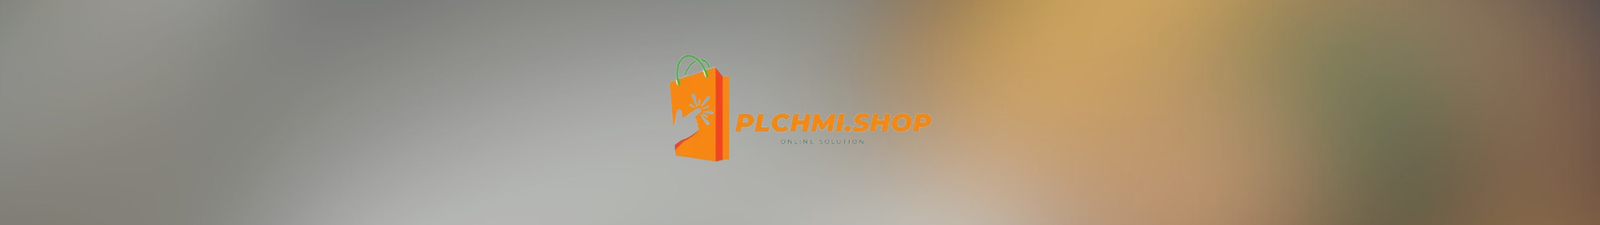 "PLCHMI.shop" is an online store specializing in PLCs (Programmable Logic Controllers) and HMIs (Human Machine Interfaces) for industrial automation.